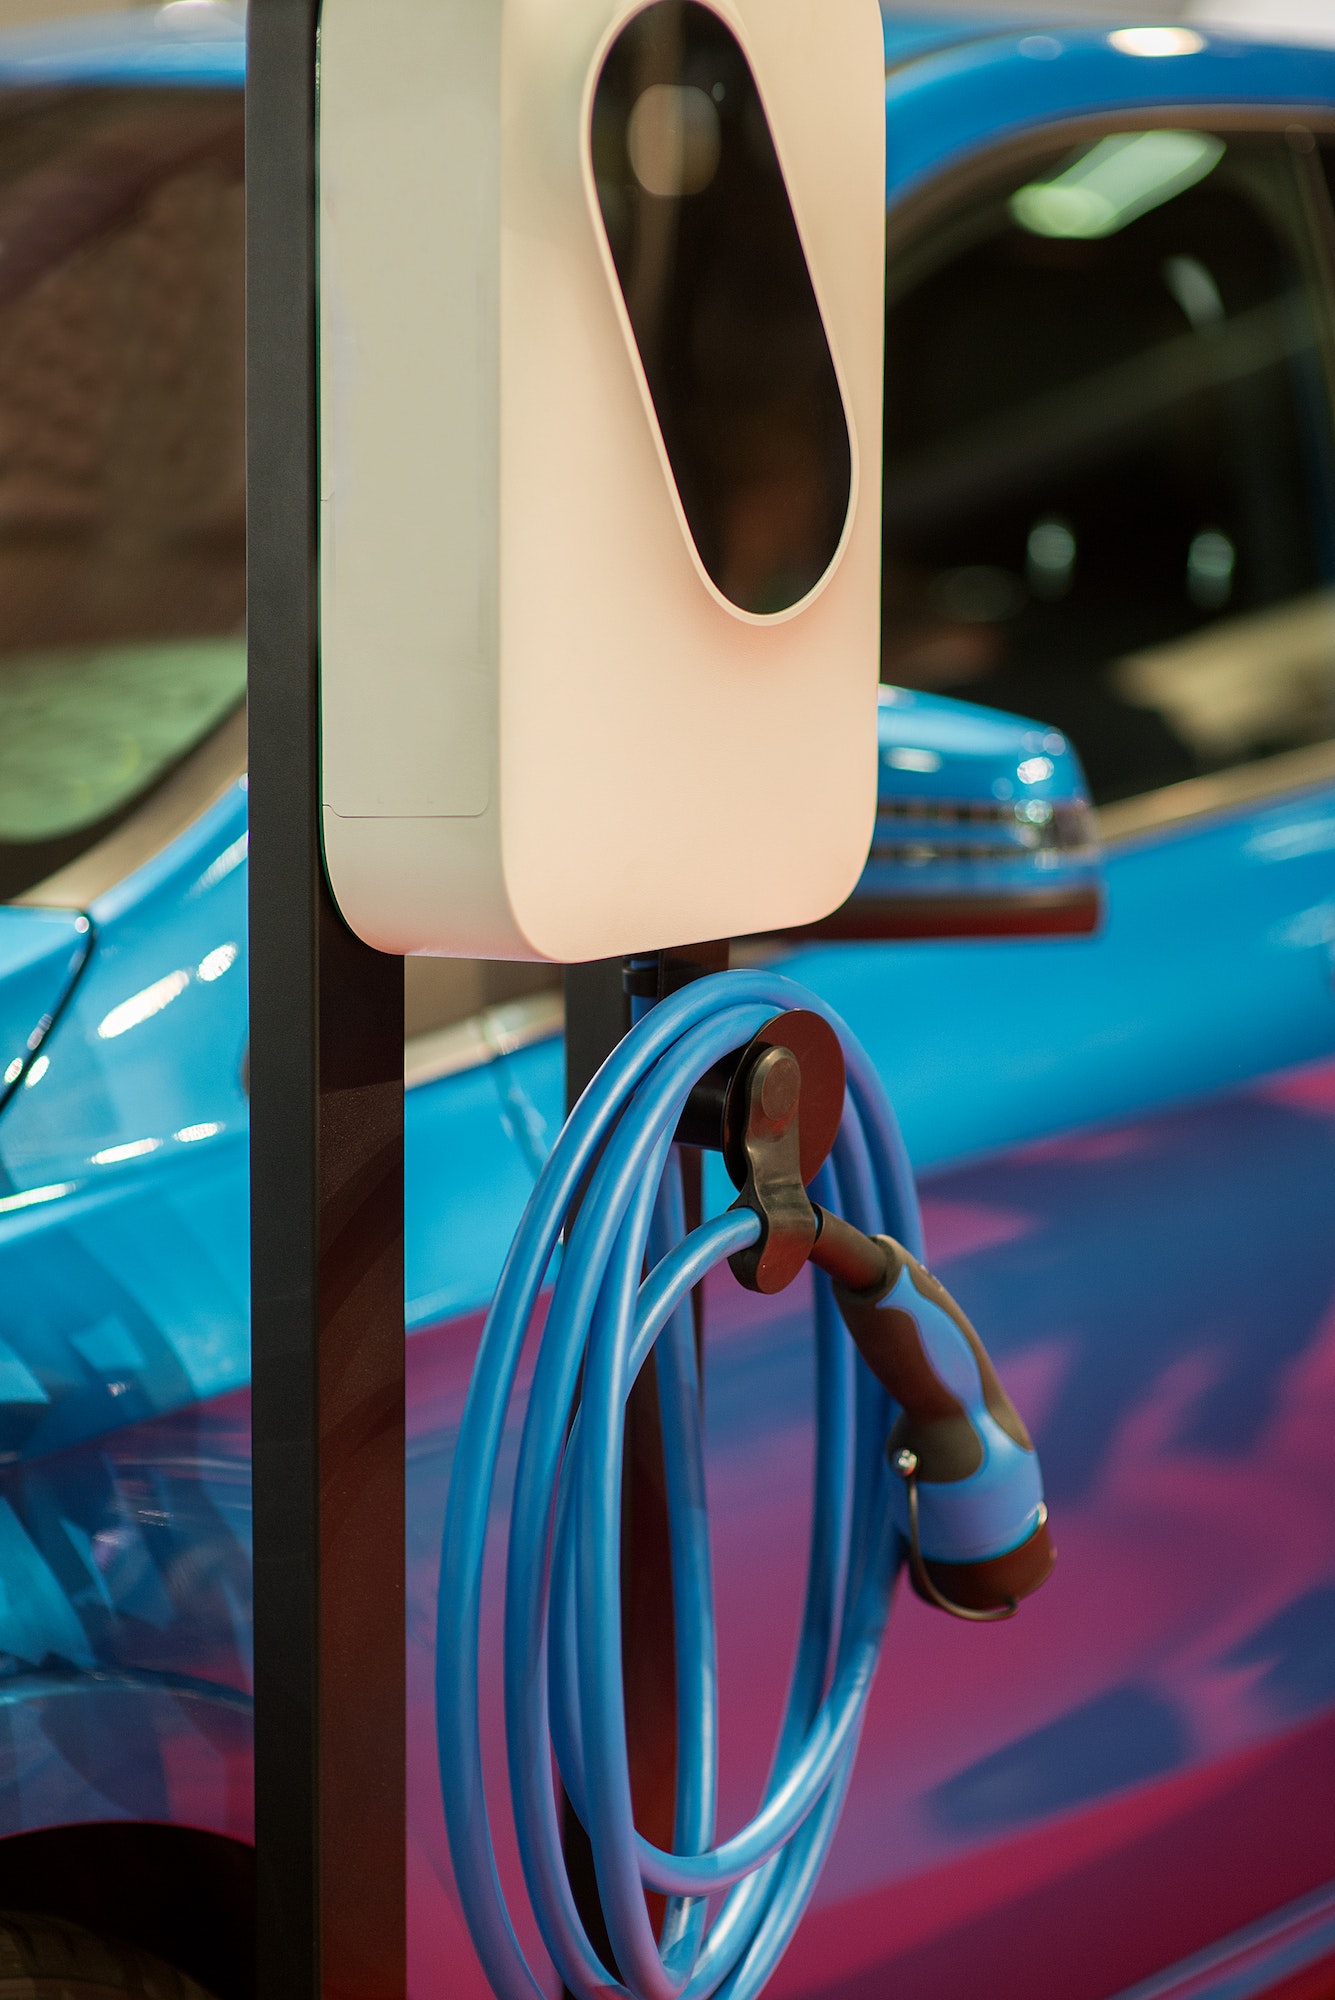 EV Car or Electric car at charging station with the power cable supply plugged in on blurred Night